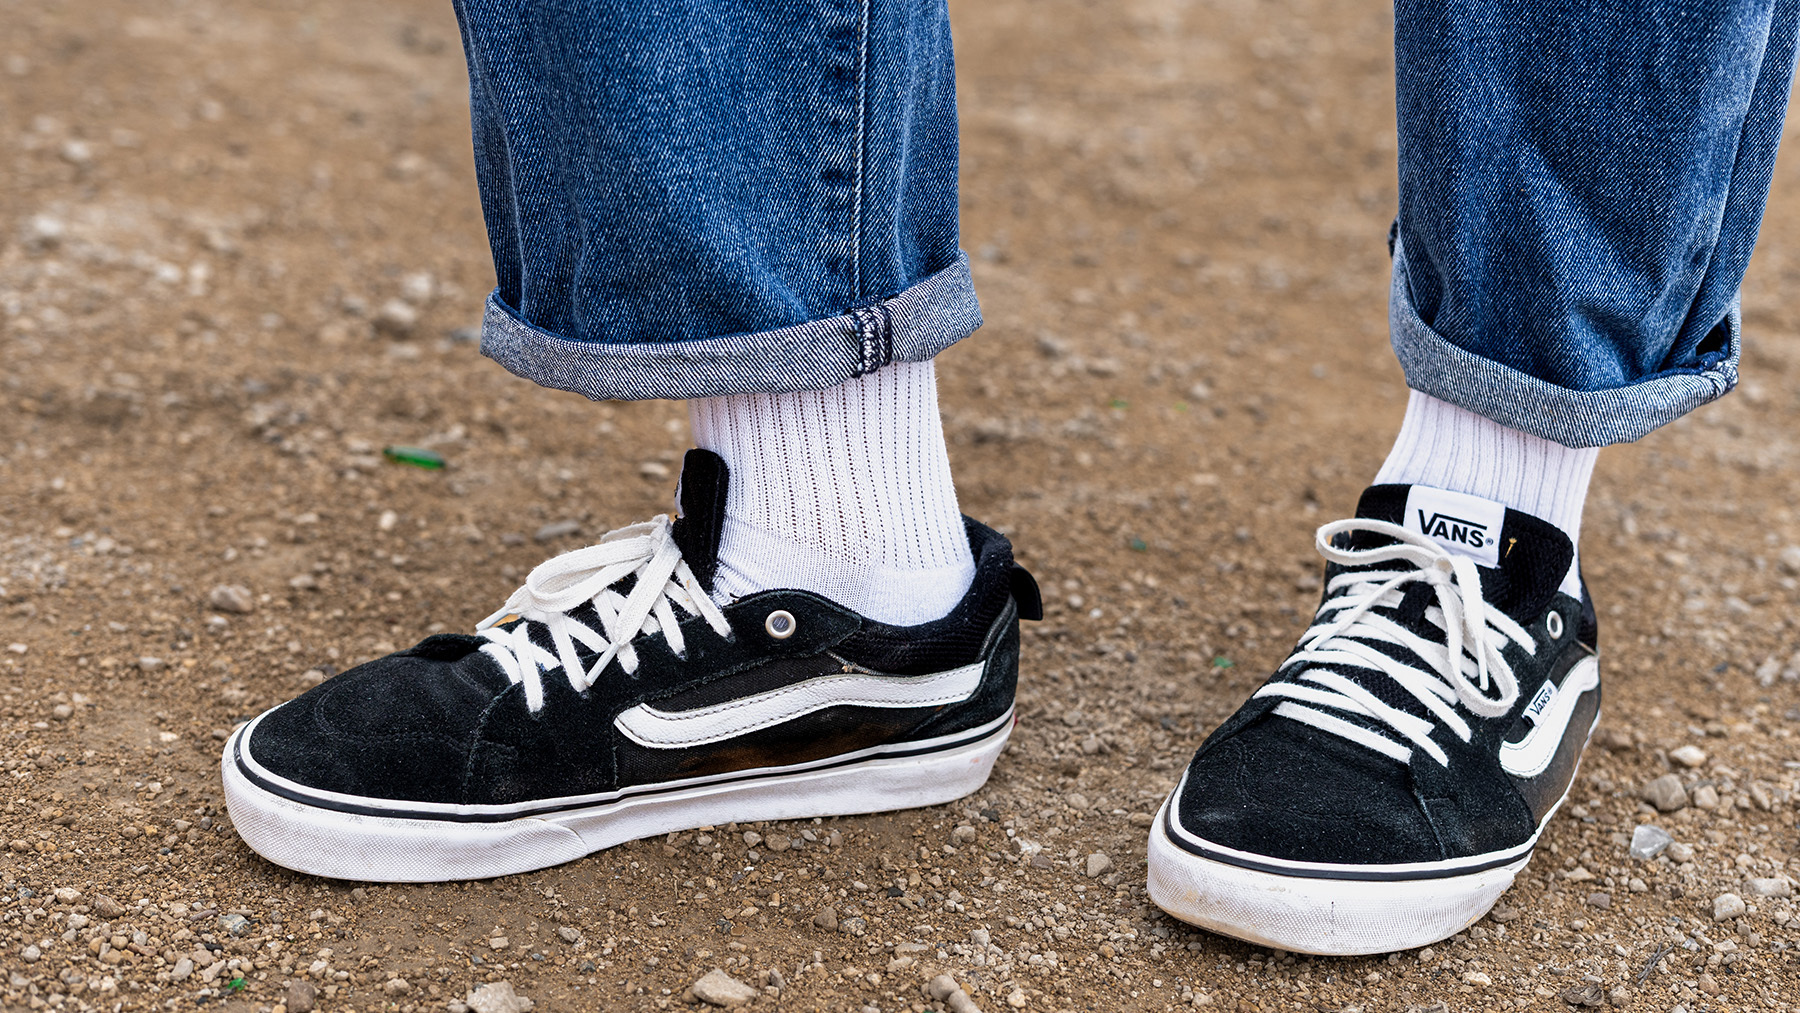 Vans Knows You're Sick of Their Shoes | BoF